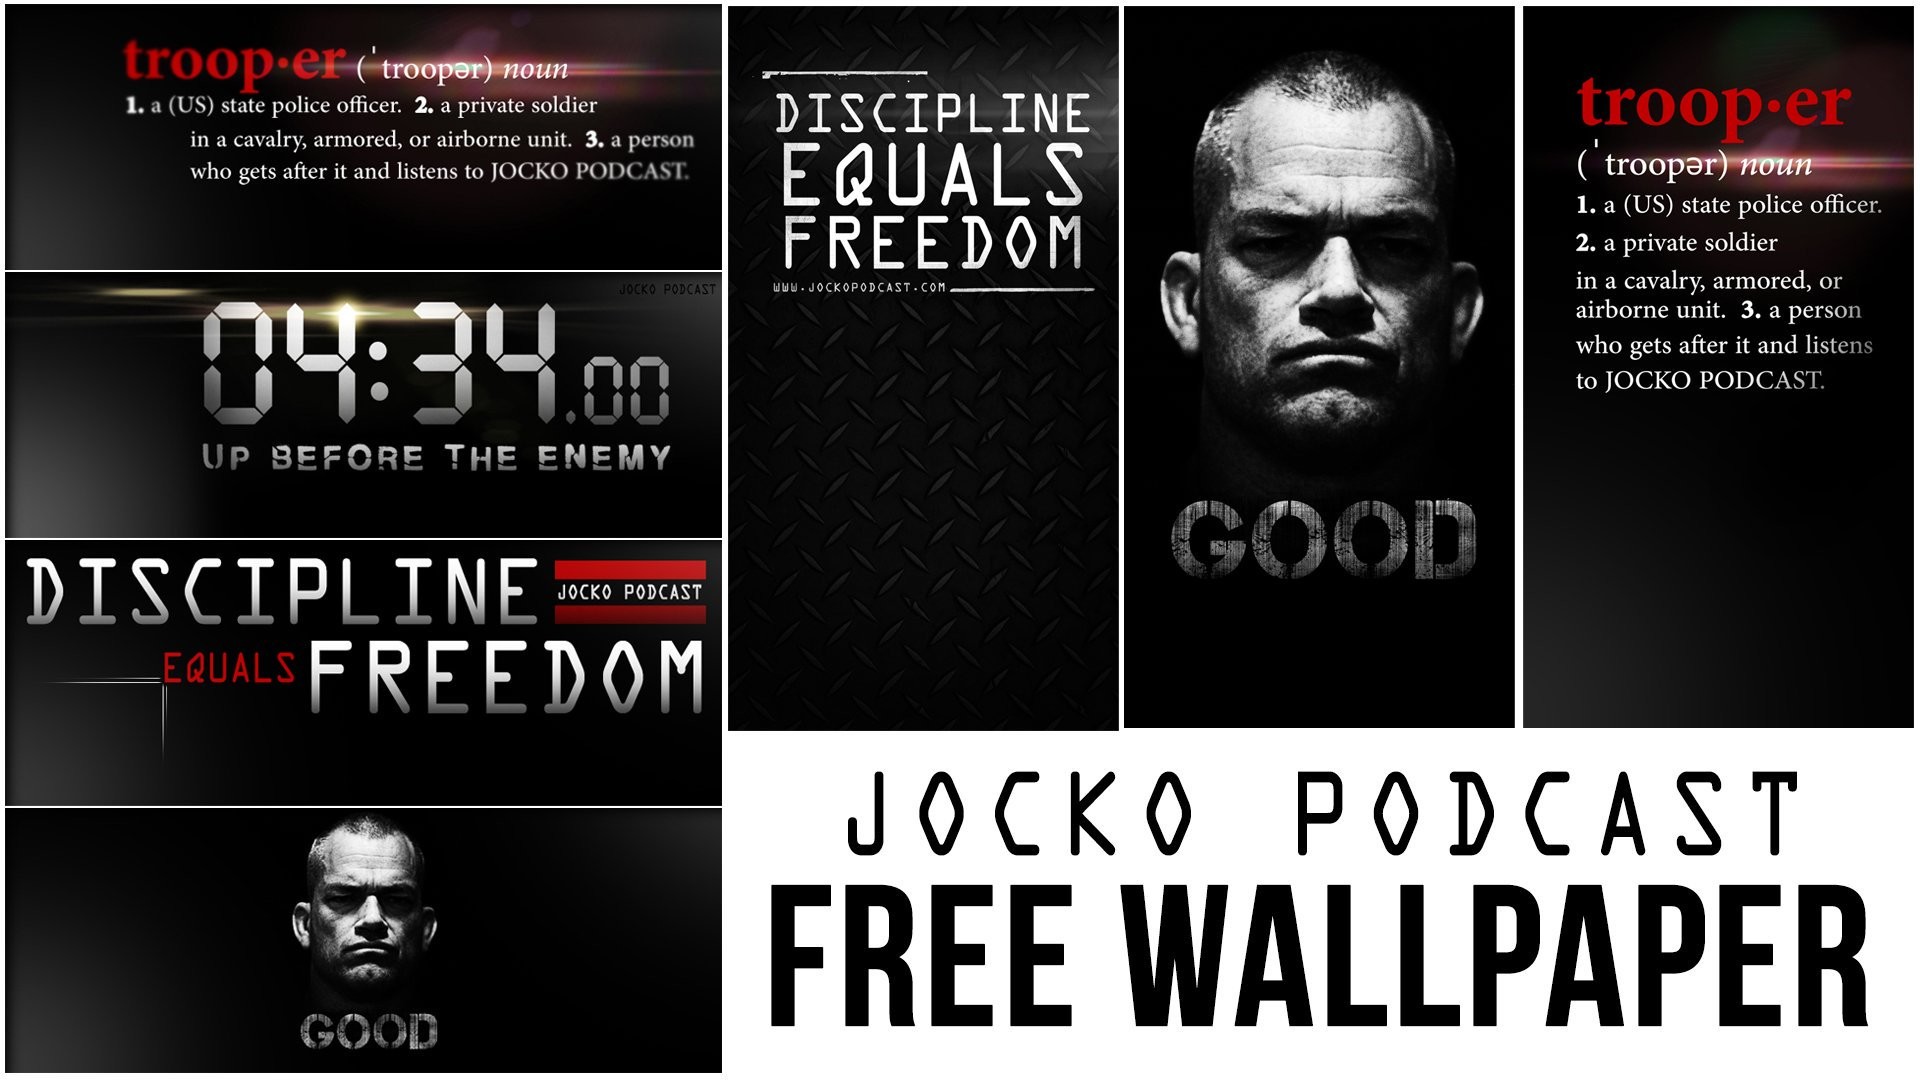 1920x1080 Echo Charles on Twitter: "Finally got the Jocko Podcast wallpaper available  for your phone and Facebook cover at https://t.co/cyf6bf4Tr6 ...